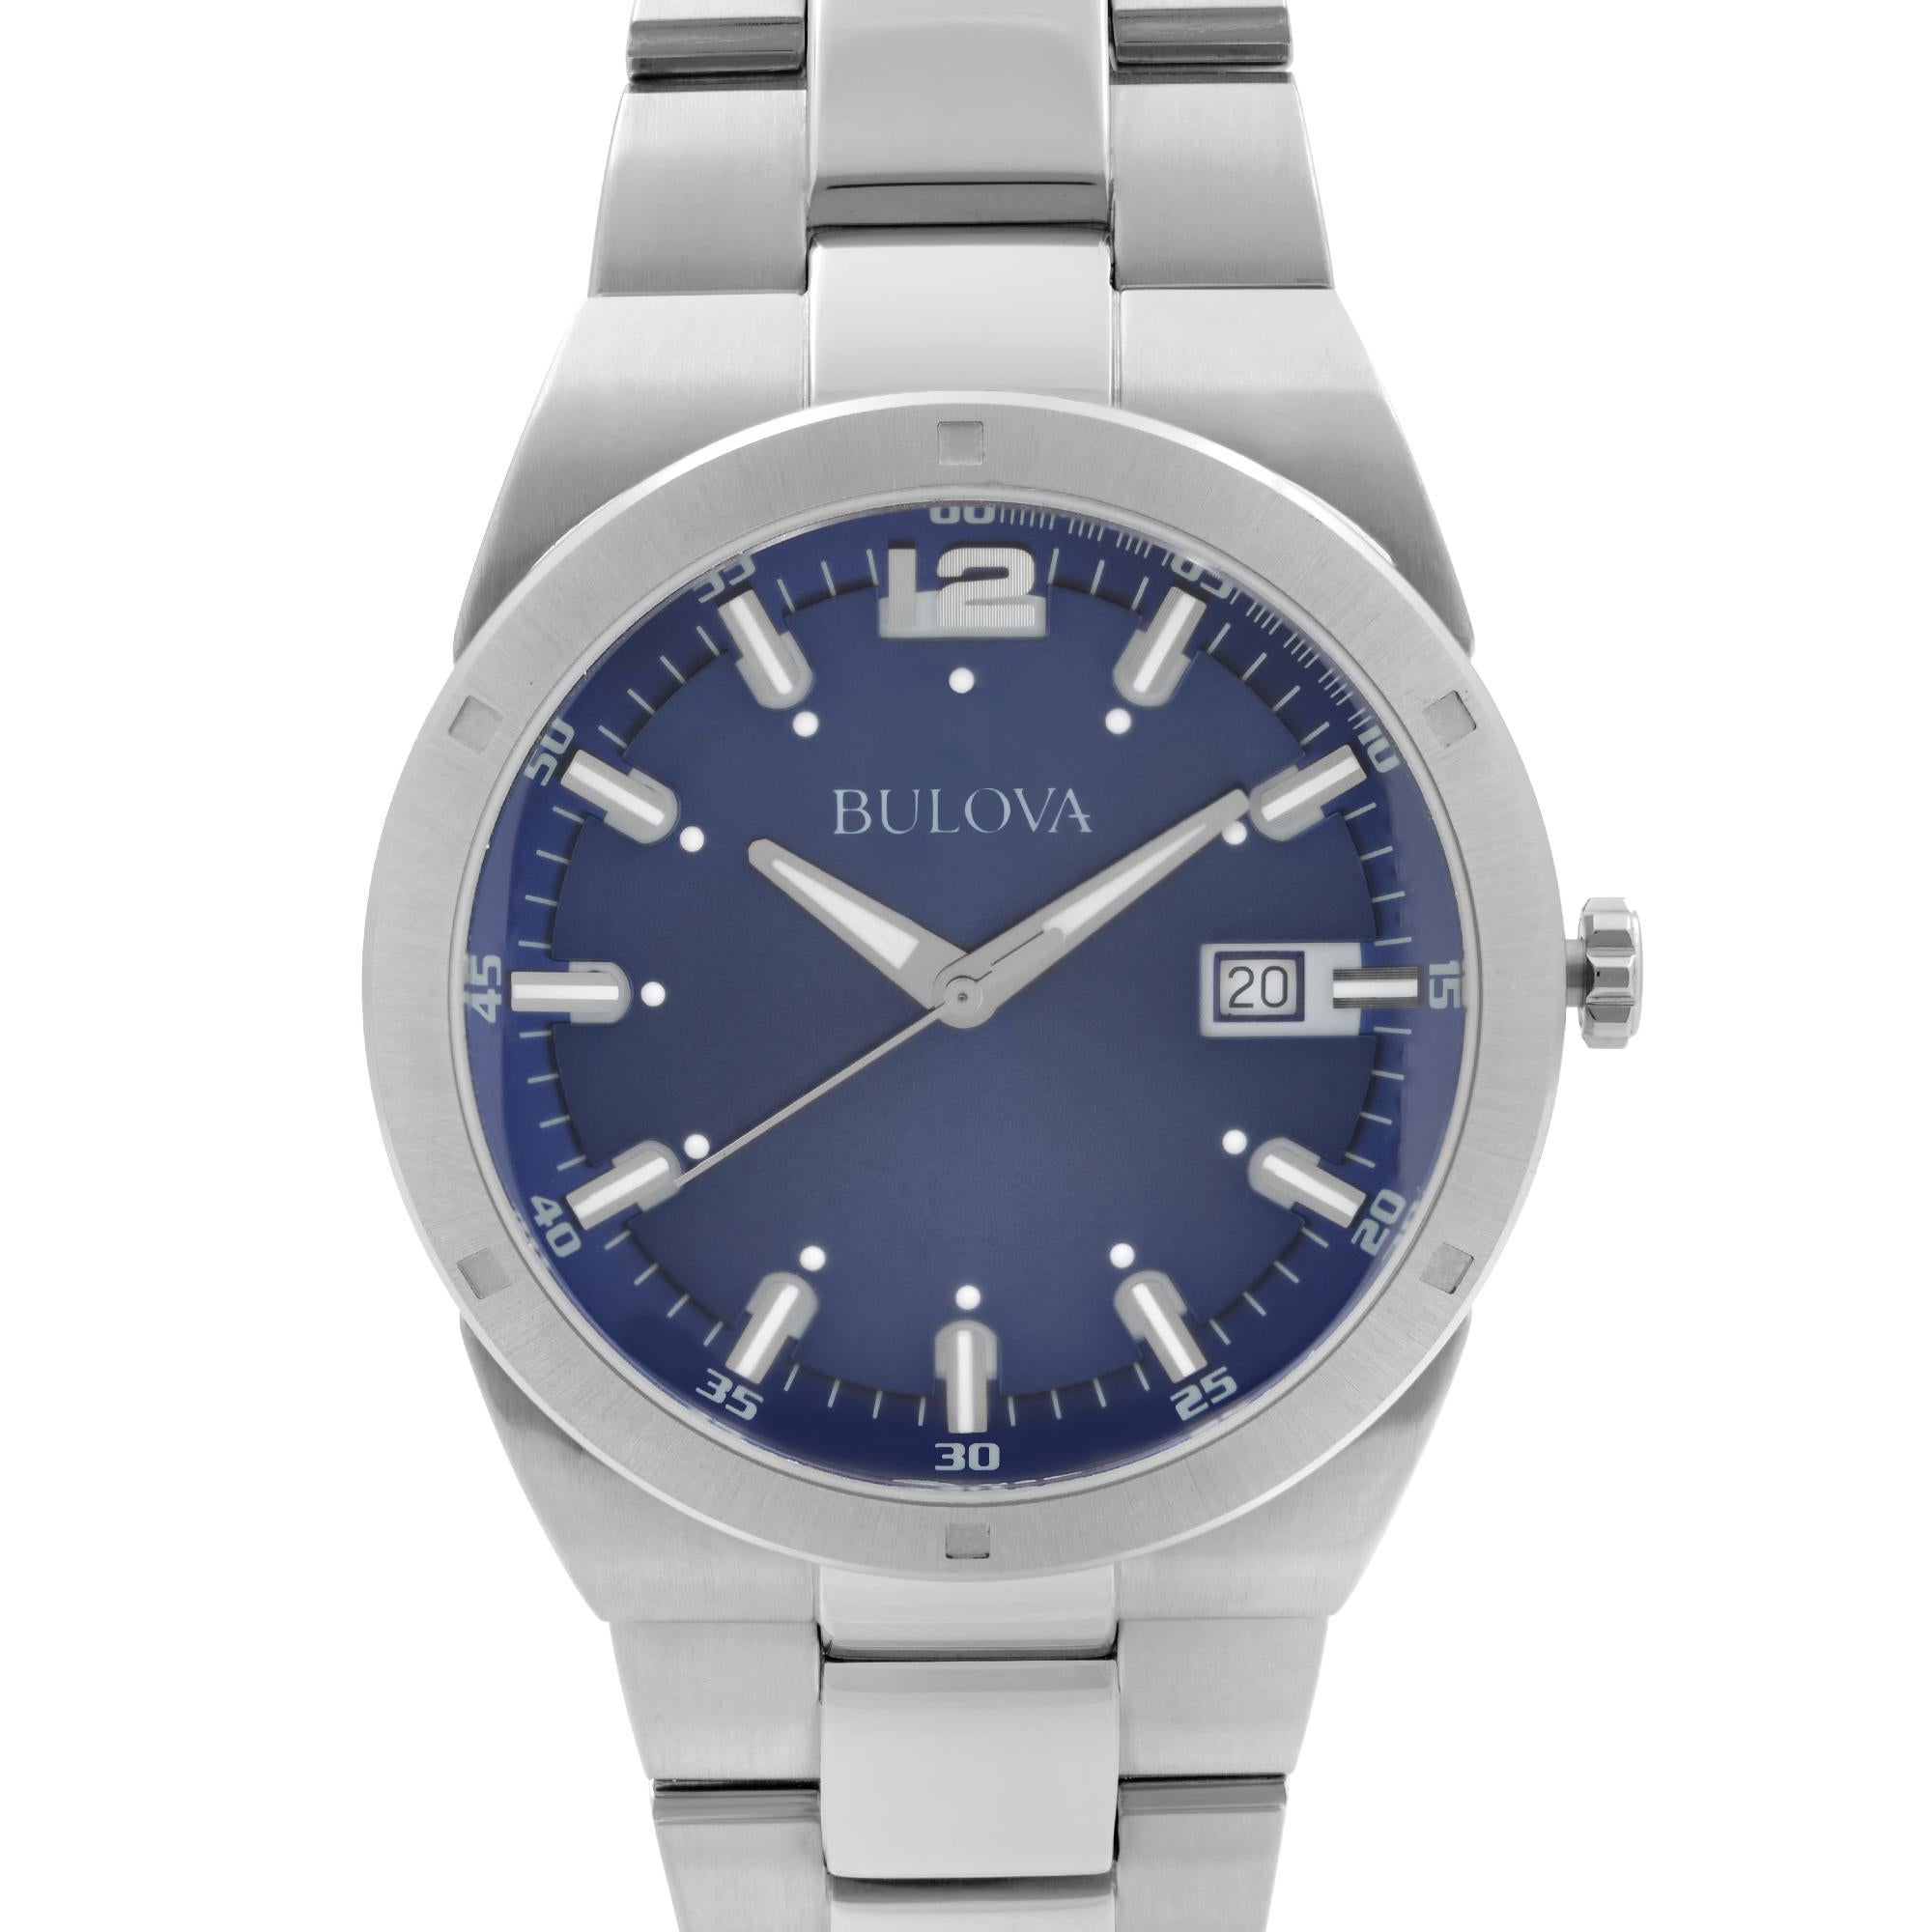 Display Model Bulova Classic 96B220. The Watch has Minor Scratches Due to Store Handling. This Beautiful Timepiece is Powered by Quartz (Battery) Movement And Features: Stainless Steel Case and Bracelet, Fixed Stainless Steel Bezel, Blue Dial with